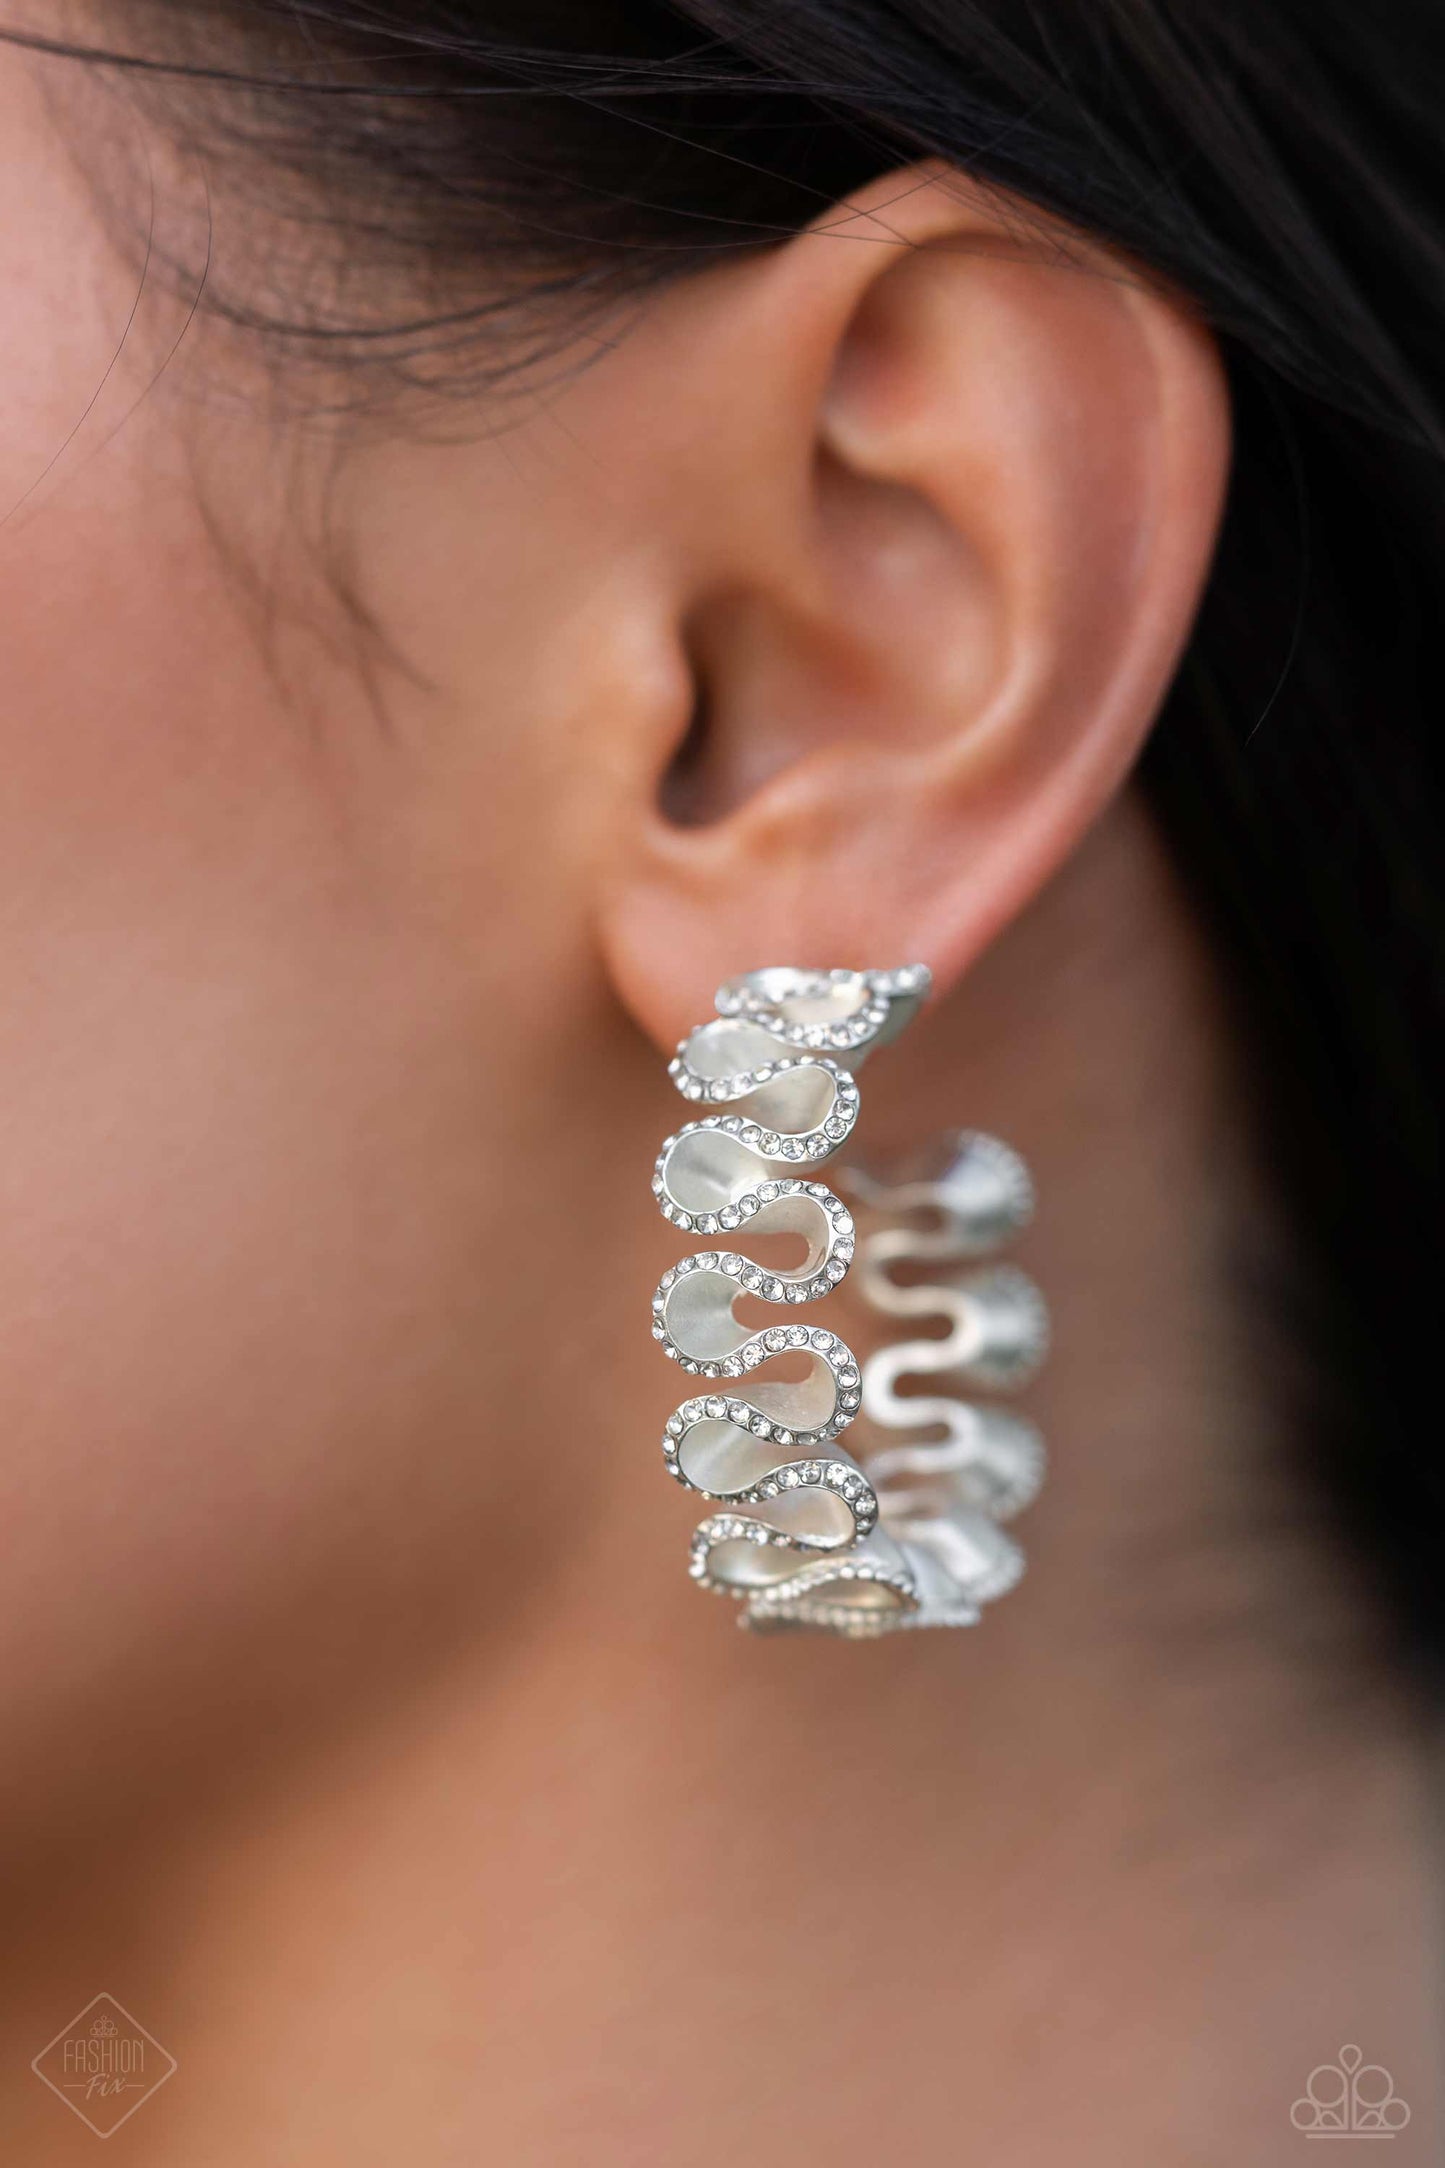 Resolutely Ruffled White Hoop Earring - Paparazzi Accessories  Meticulously dotted with white rhinestones, white pearlescent-painted ribbons playfully gather around the ear for an elegant display. Earring attaches to a standard post fitting. Hoop measures approximately 1 1/2" in diameter.  Sold as one pair of hoop earrings.  Sku:  P5HO-WTXX-160SY